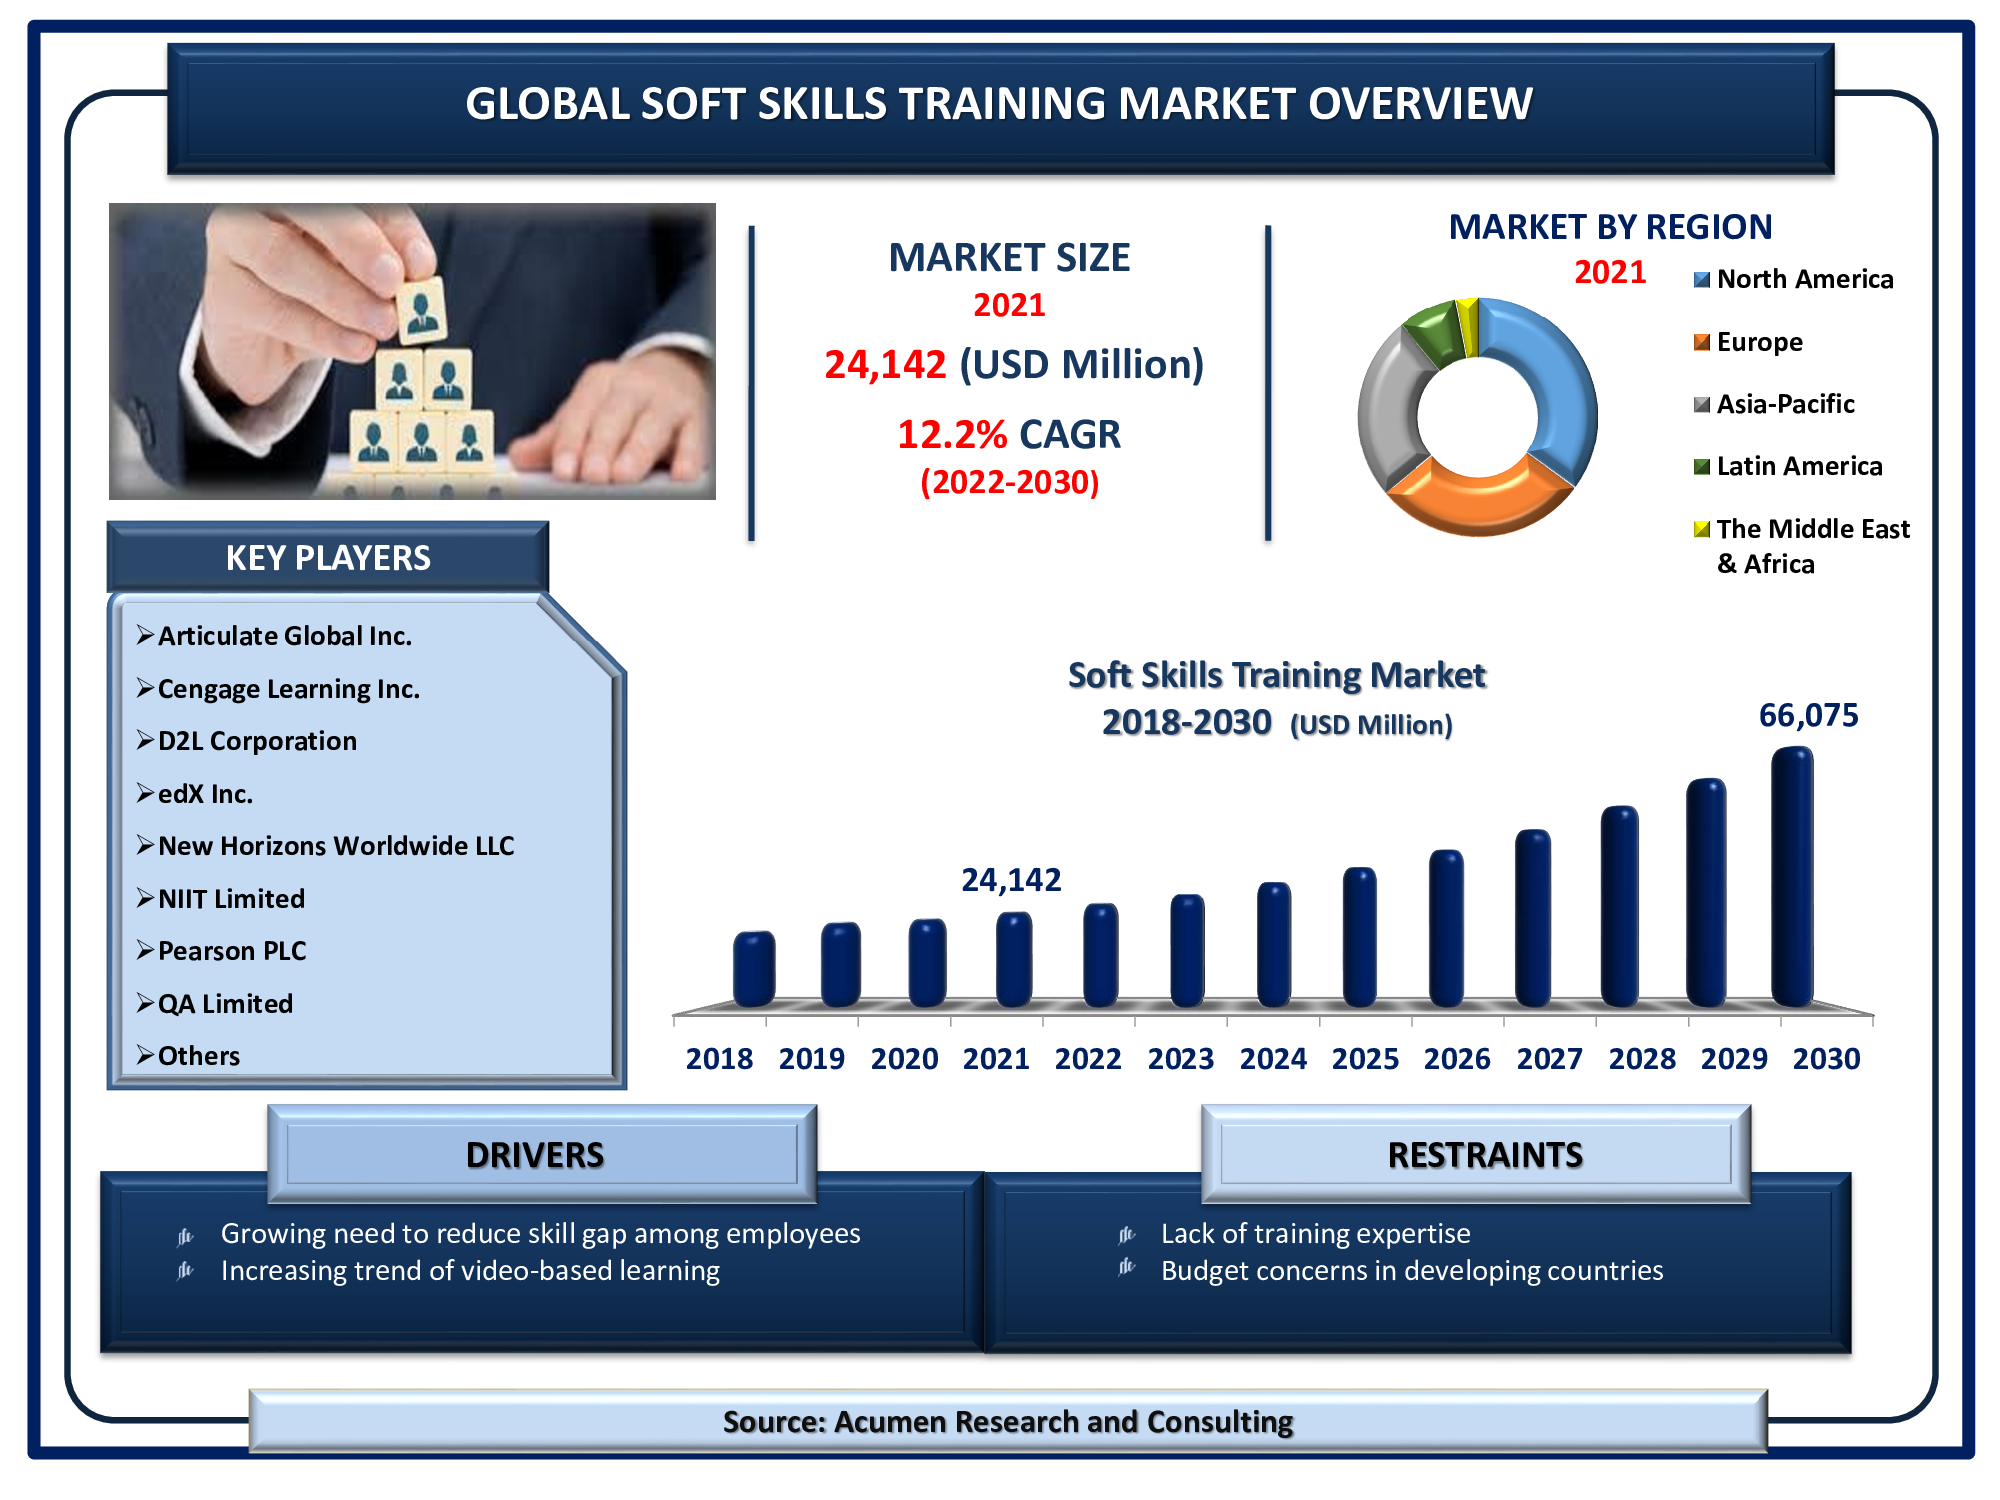 The Global Soft Skills Training Market Size accounted USD 24,142 million in 2021 and is estimated to achieve a market size of USD 66,075 million by 2030; growing at a CAGR of 12.2%.